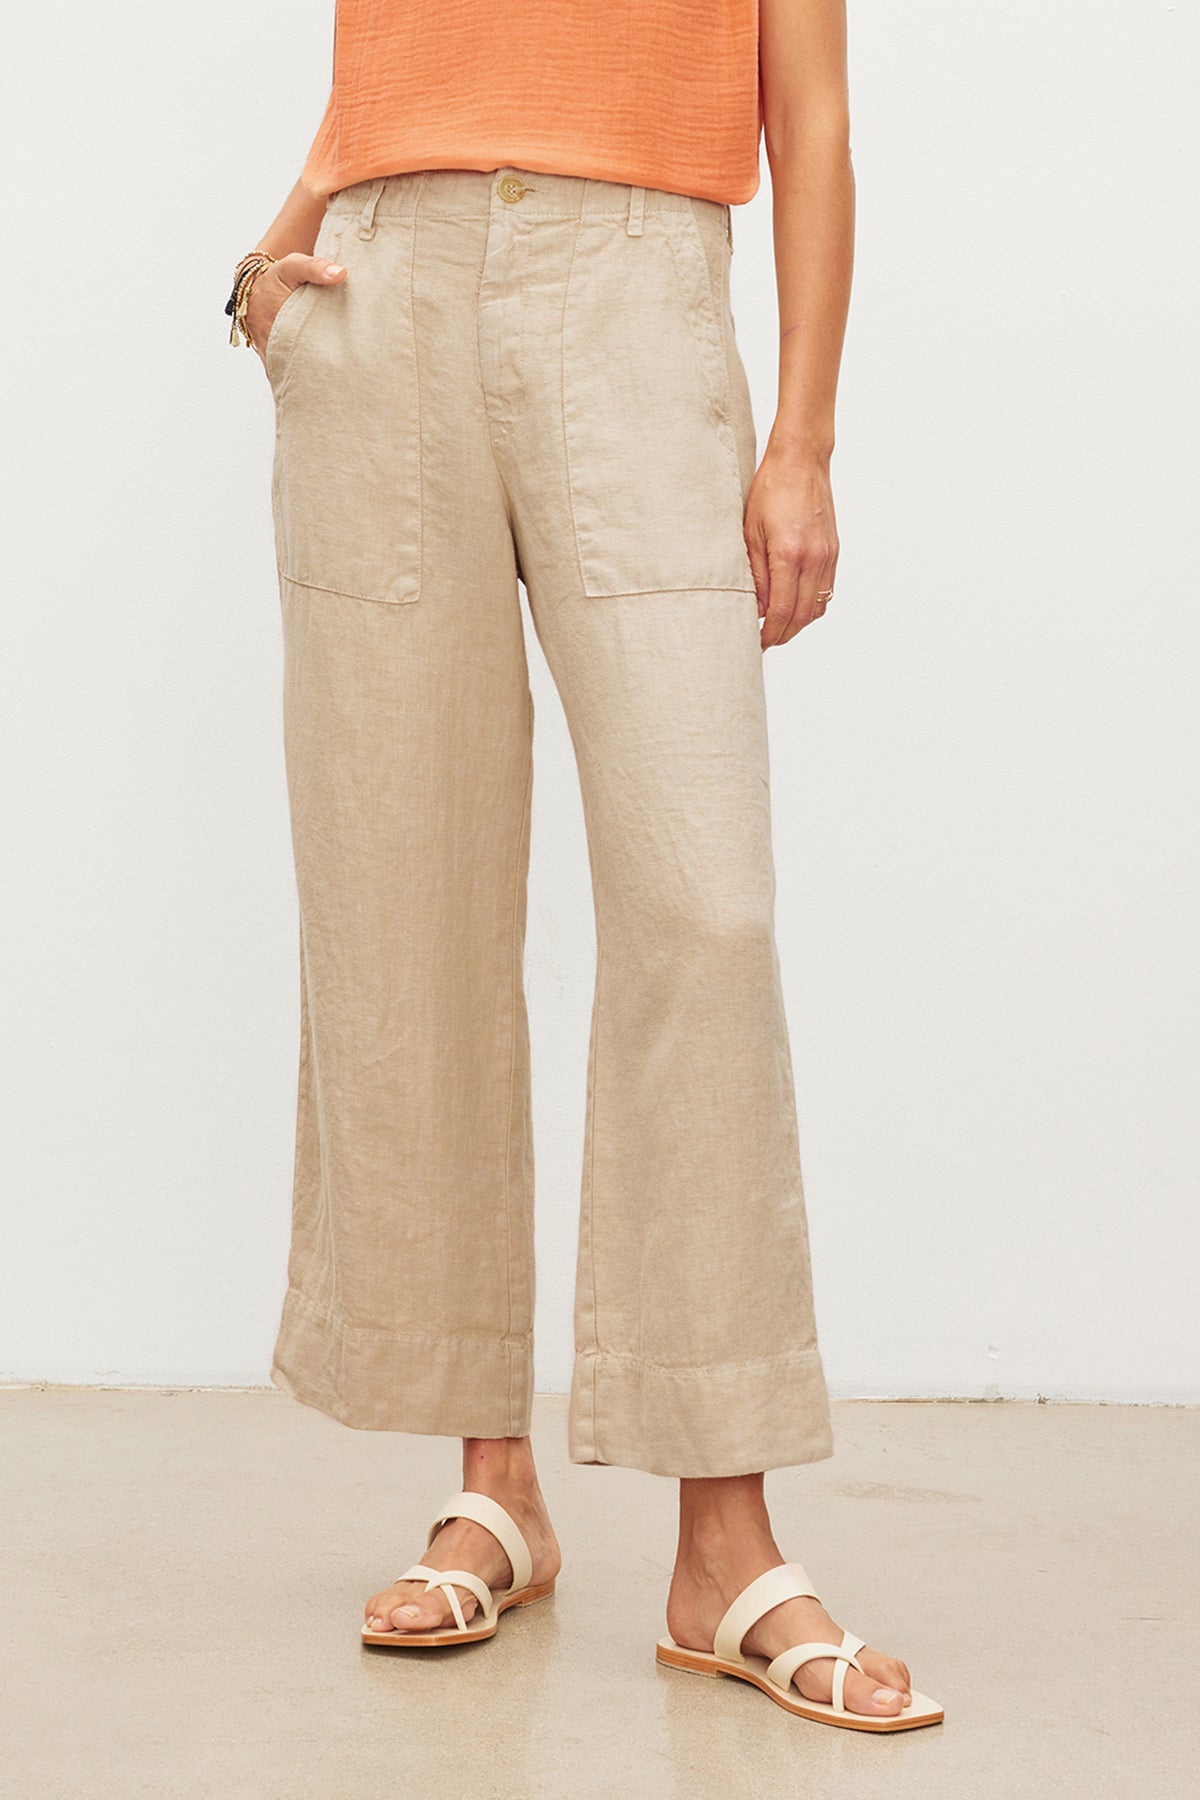   Woman wearing Velvet by Graham & Spencer DRU Heavy Linen Pant with patch pockets and strappy sandals. 